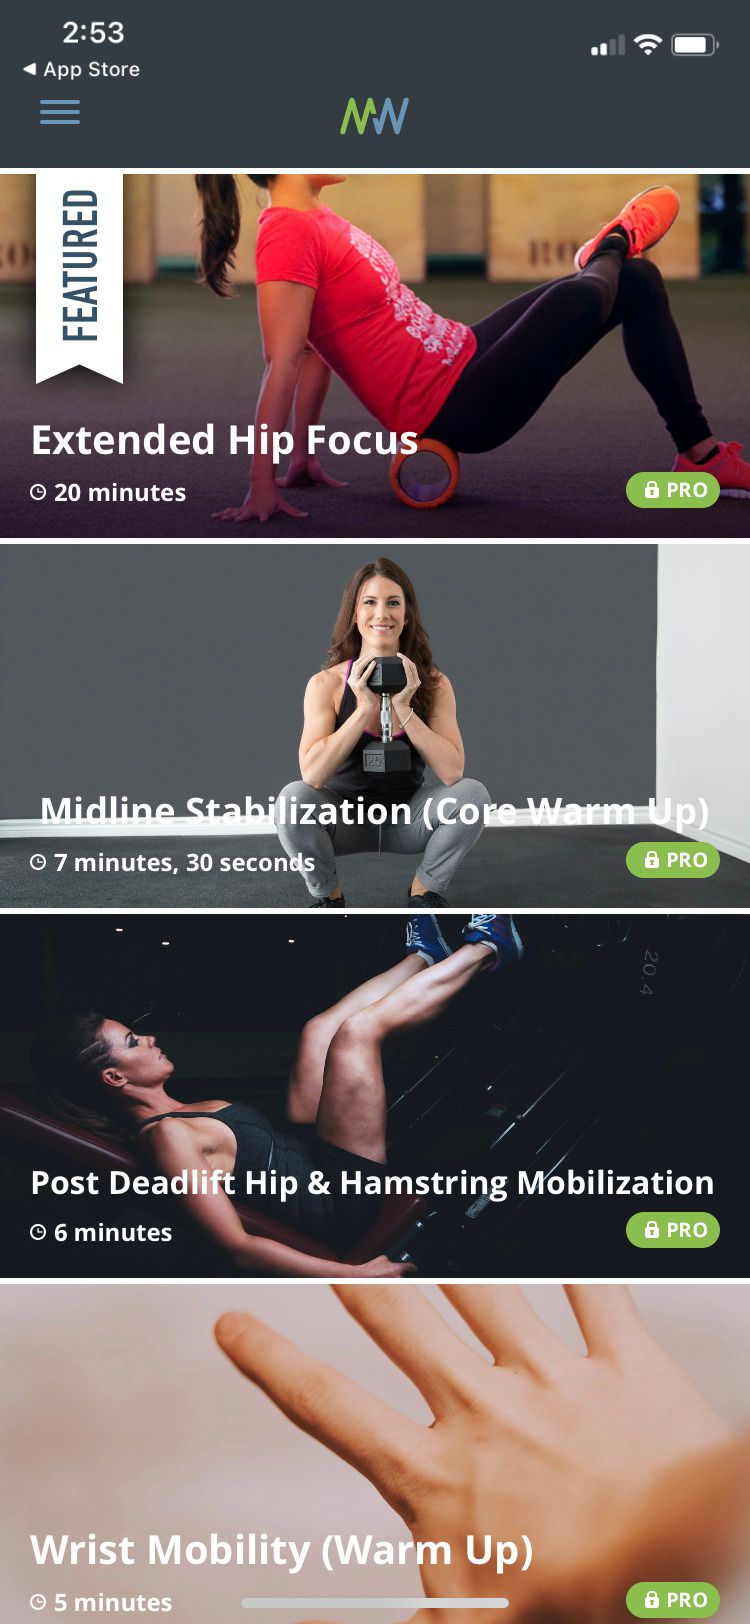 Move Well - Mobility Routines app routines list